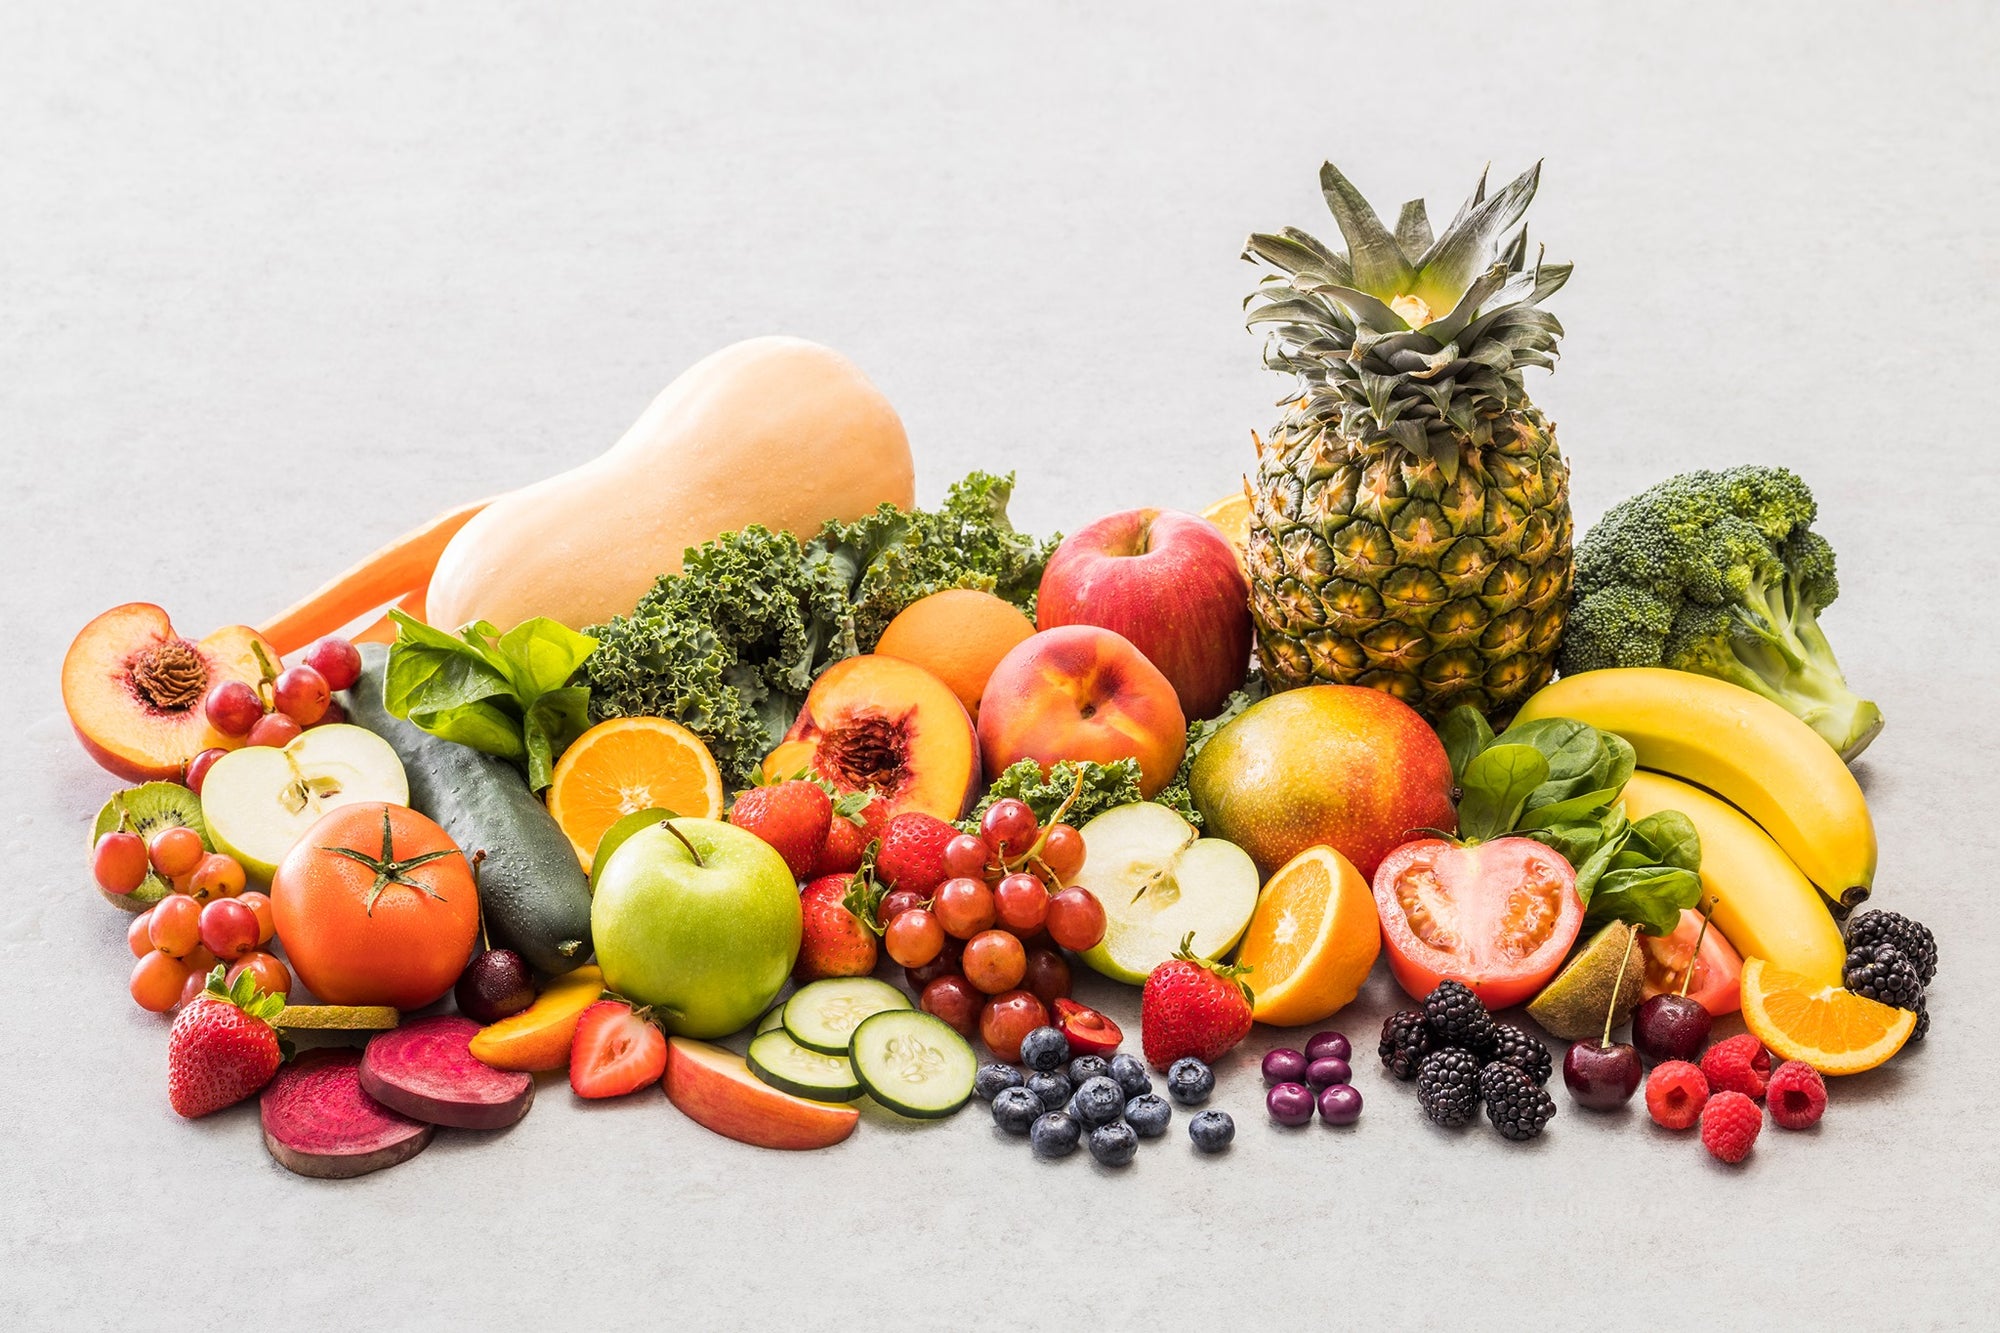 26 different fruits and vegetables on a gray backdrop